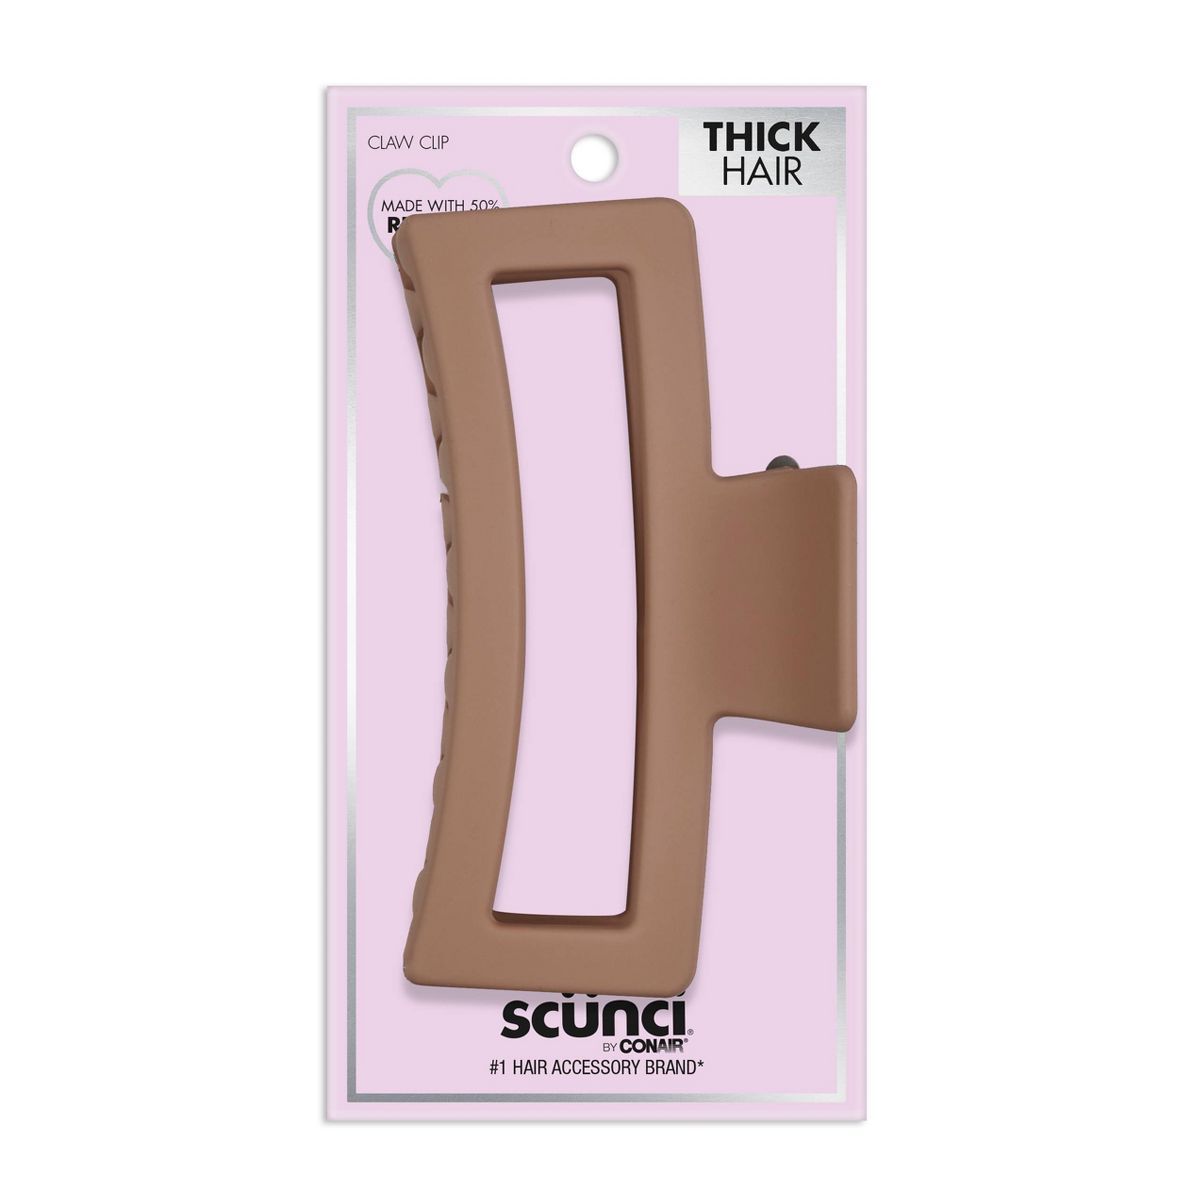 scünci Recycled Large Open Rectangle Claw Clip - Matte Beige - Thick Hair | Target